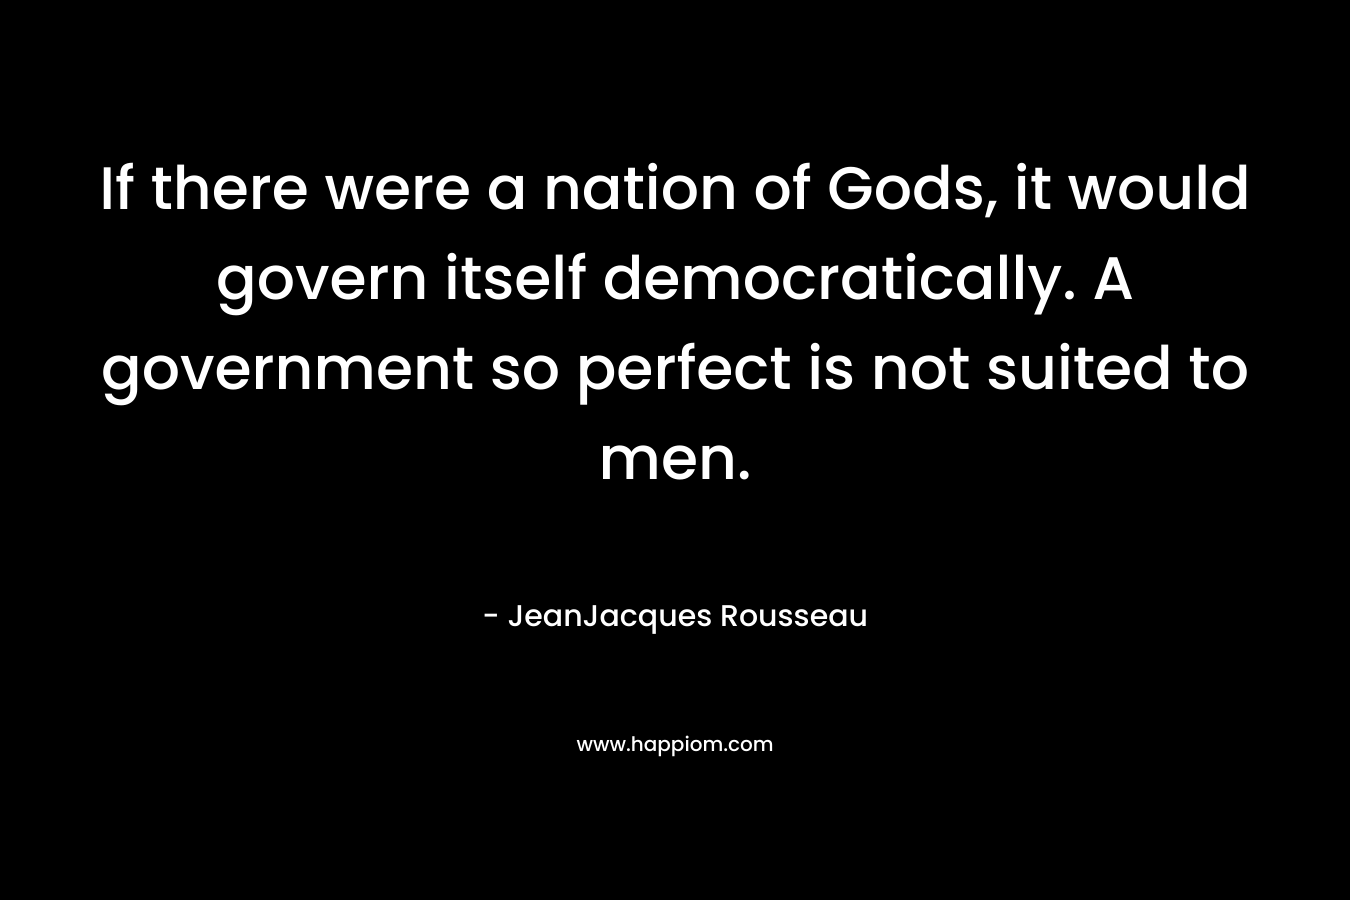 If there were a nation of Gods, it would govern itself democratically. A government so perfect is not suited to men. – JeanJacques Rousseau